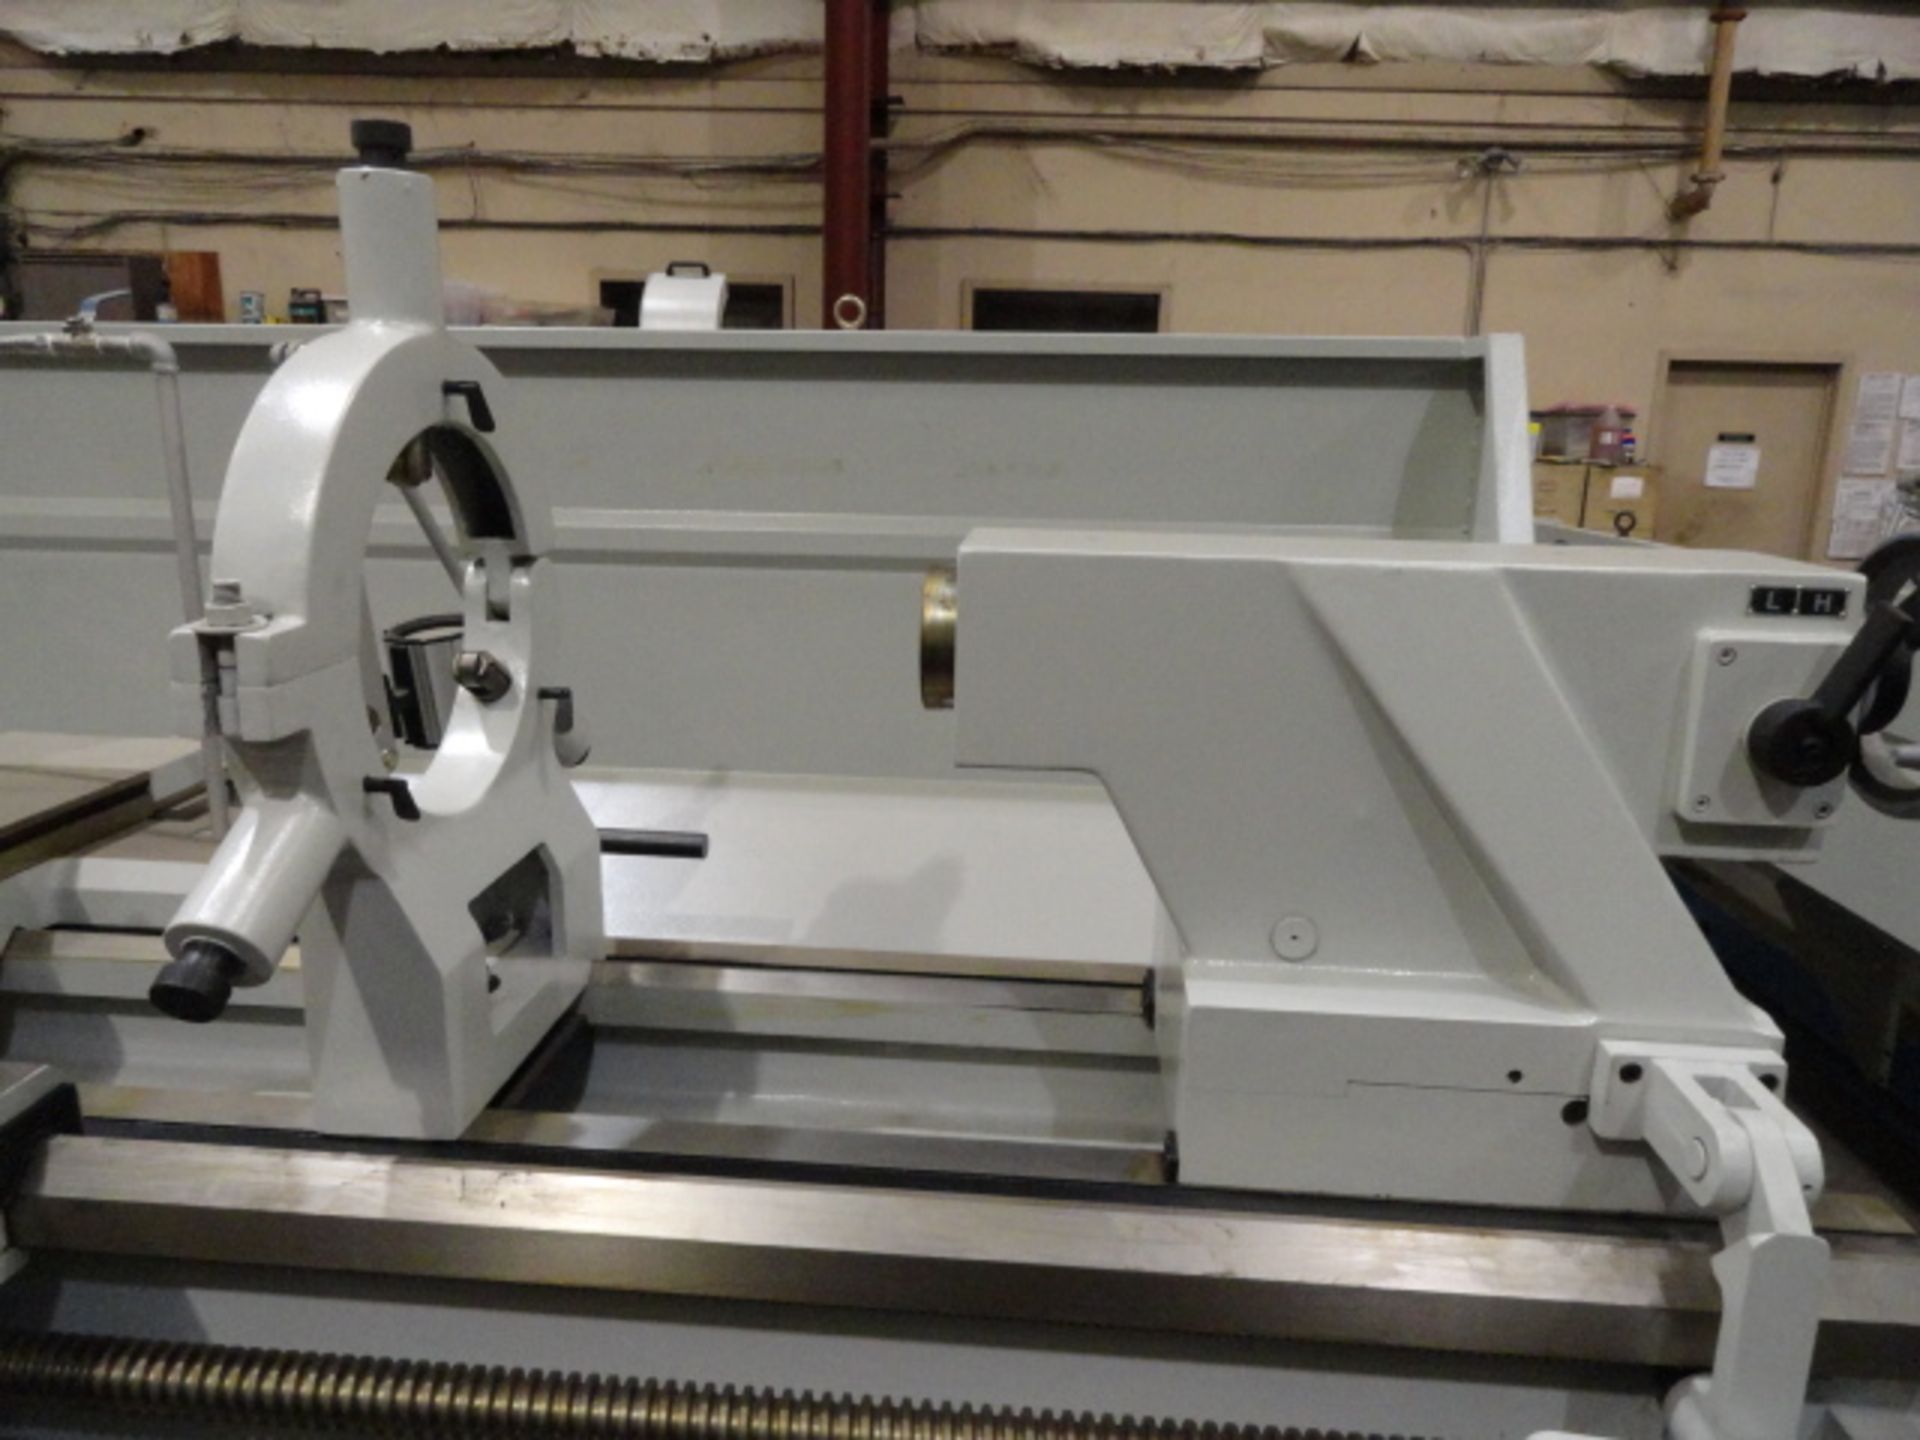 GAP BED ENGINE LATHE, ROUGHNECK 26" X 80" (CHU SHING) (NEW), 17-3/8” sw. over crosslide, 38-1/8” sw. - Image 7 of 8